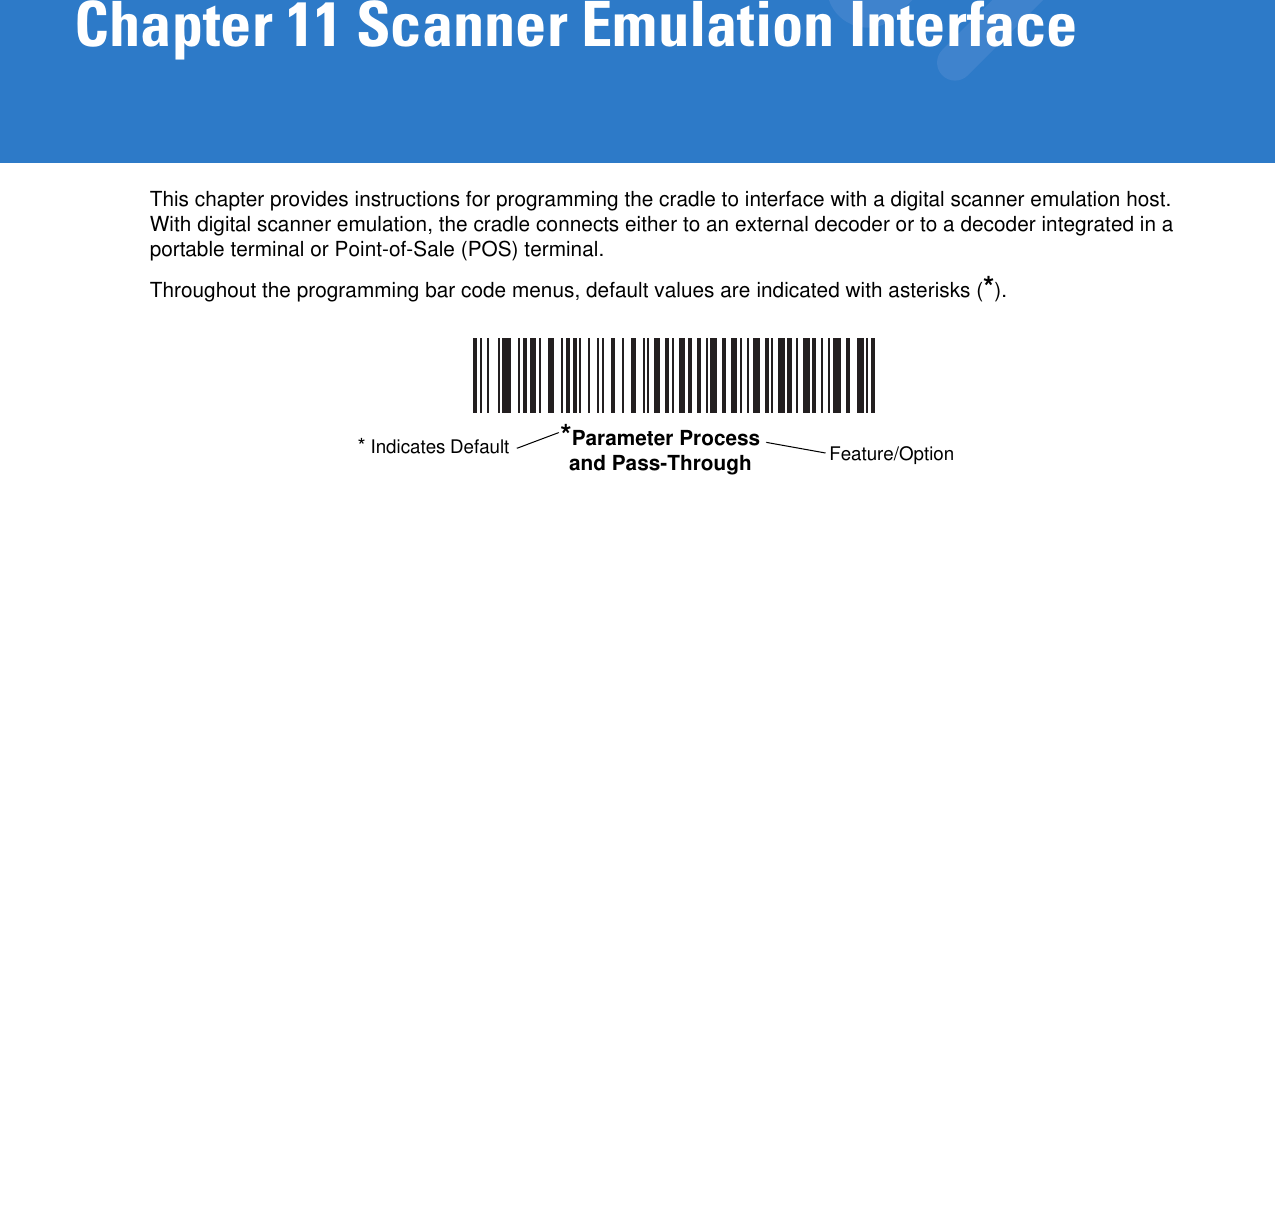 Chapter 11 Scanner Emulation InterfaceThis chapter provides instructions for programming the cradle to interface with a digital scanner emulation host. With digital scanner emulation, the cradle connects either to an external decoder or to a decoder integrated in a portable terminal or Point-of-Sale (POS) terminal.Throughout the programming bar code menus, default values are indicated with asterisks (*).*Parameter Process and Pass-Through Feature/Option* Indicates Default